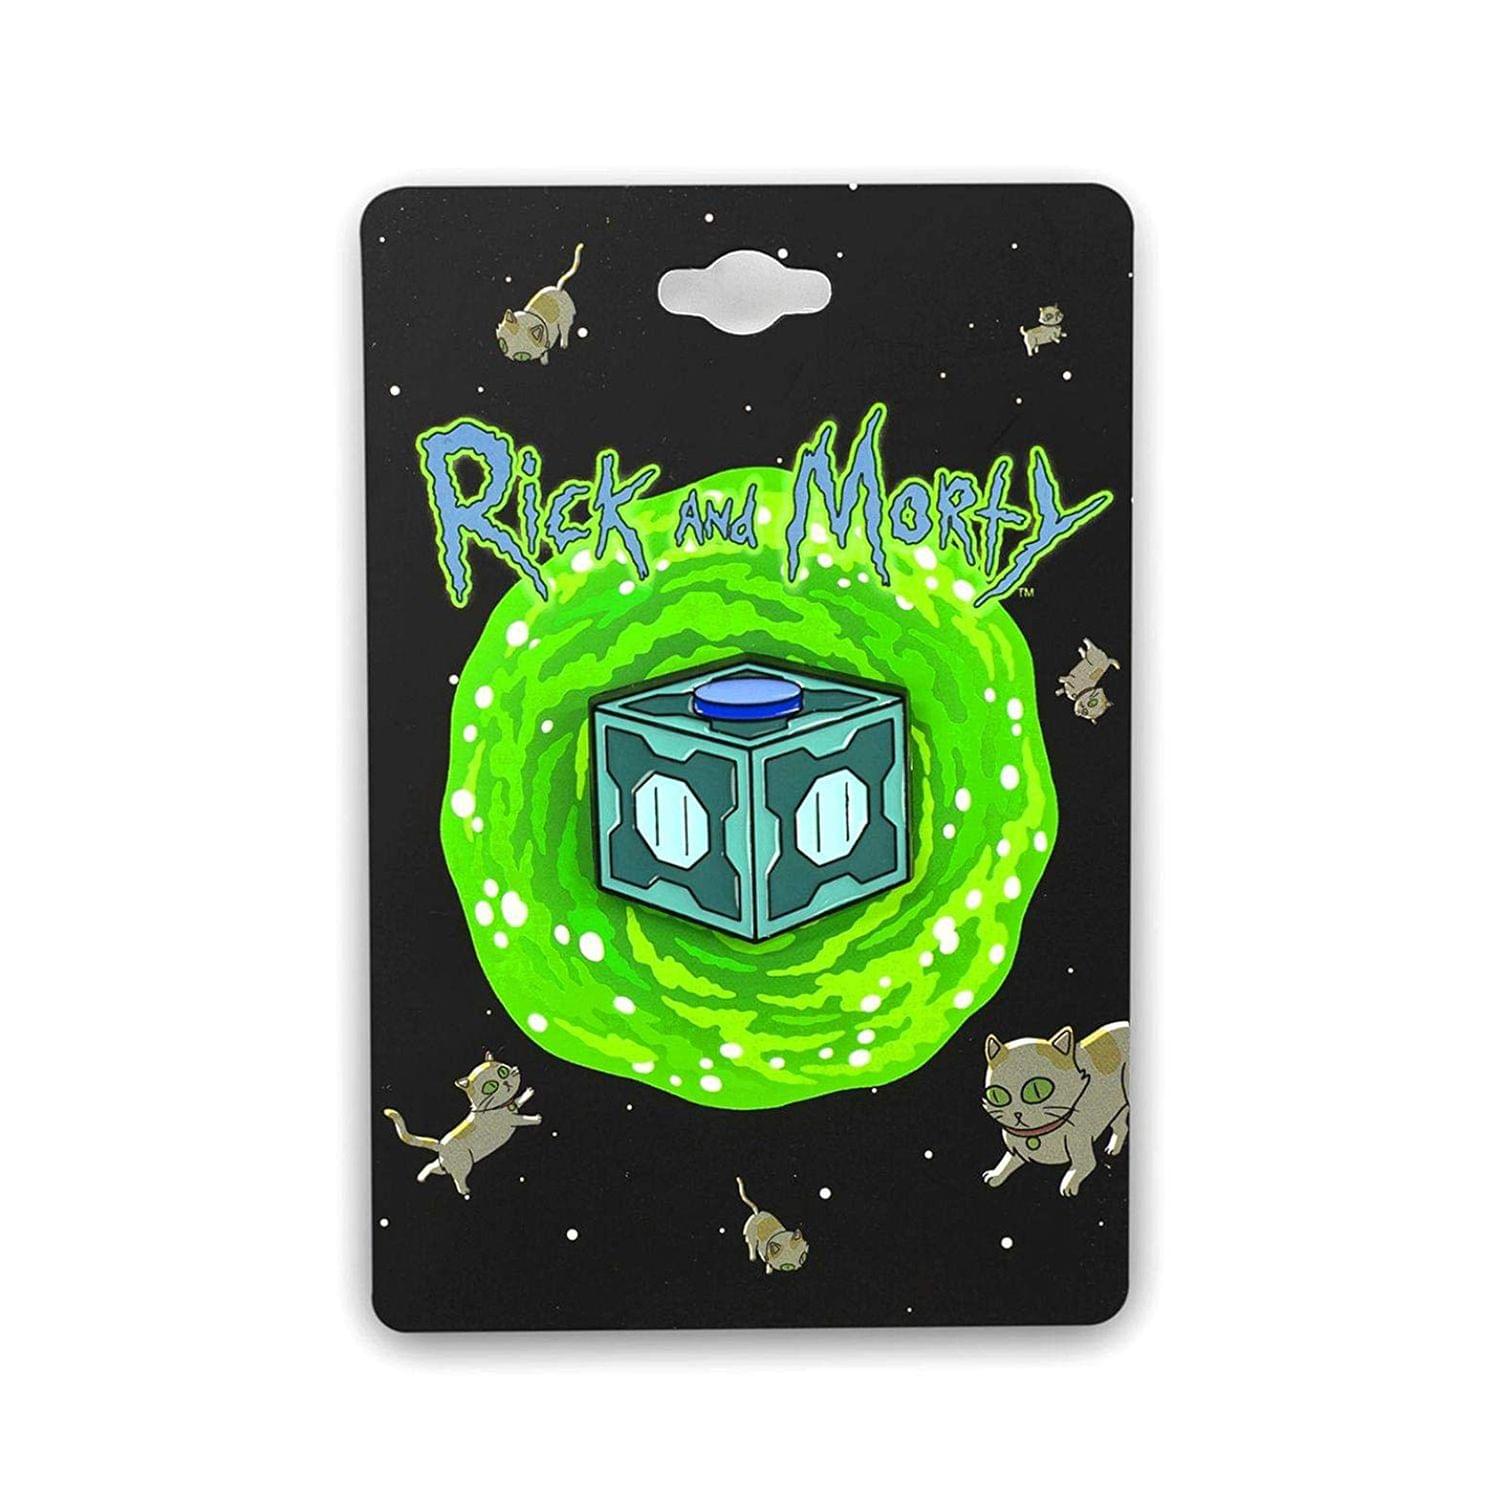 Rick and Morty Collectibles | Mr. Meeseeks Enamel Pin | 2 Inches